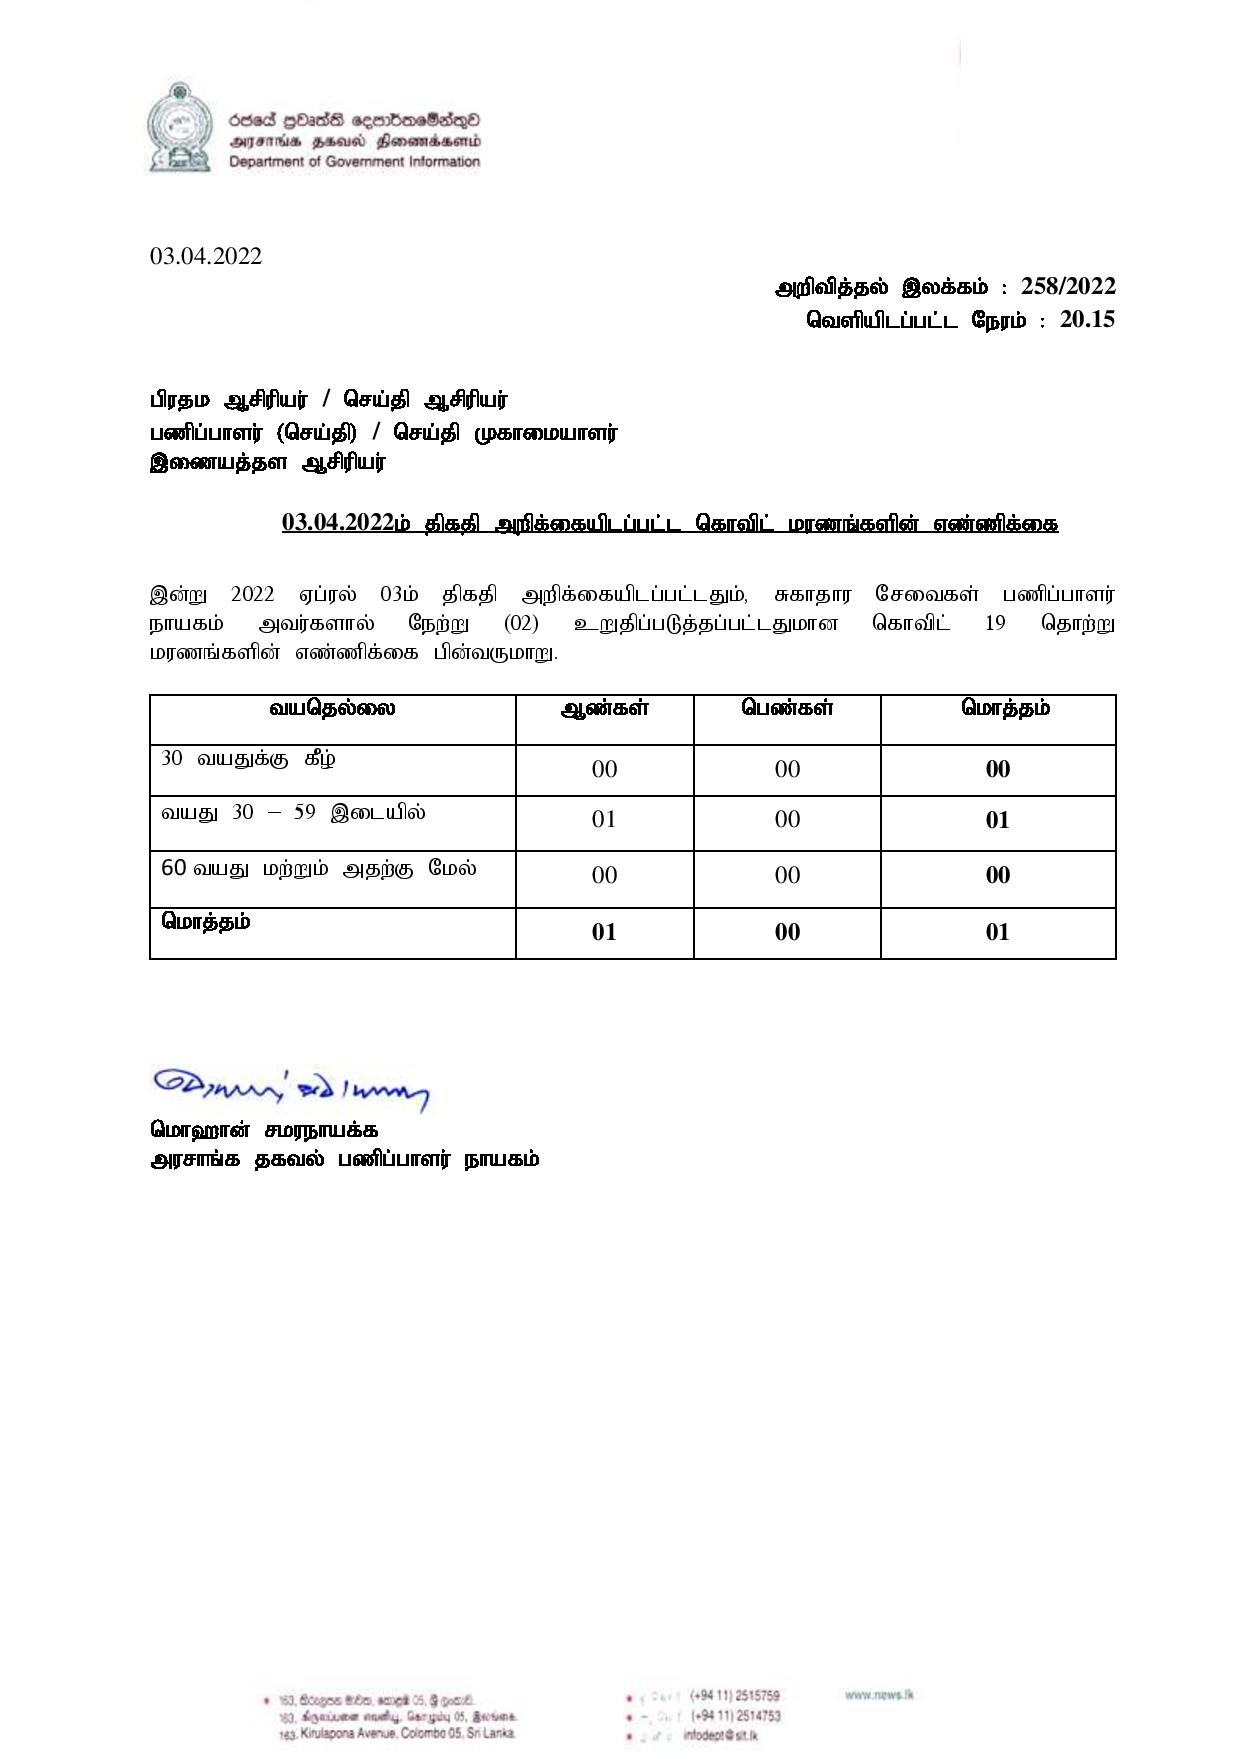 Release No 258 Tamil page 001